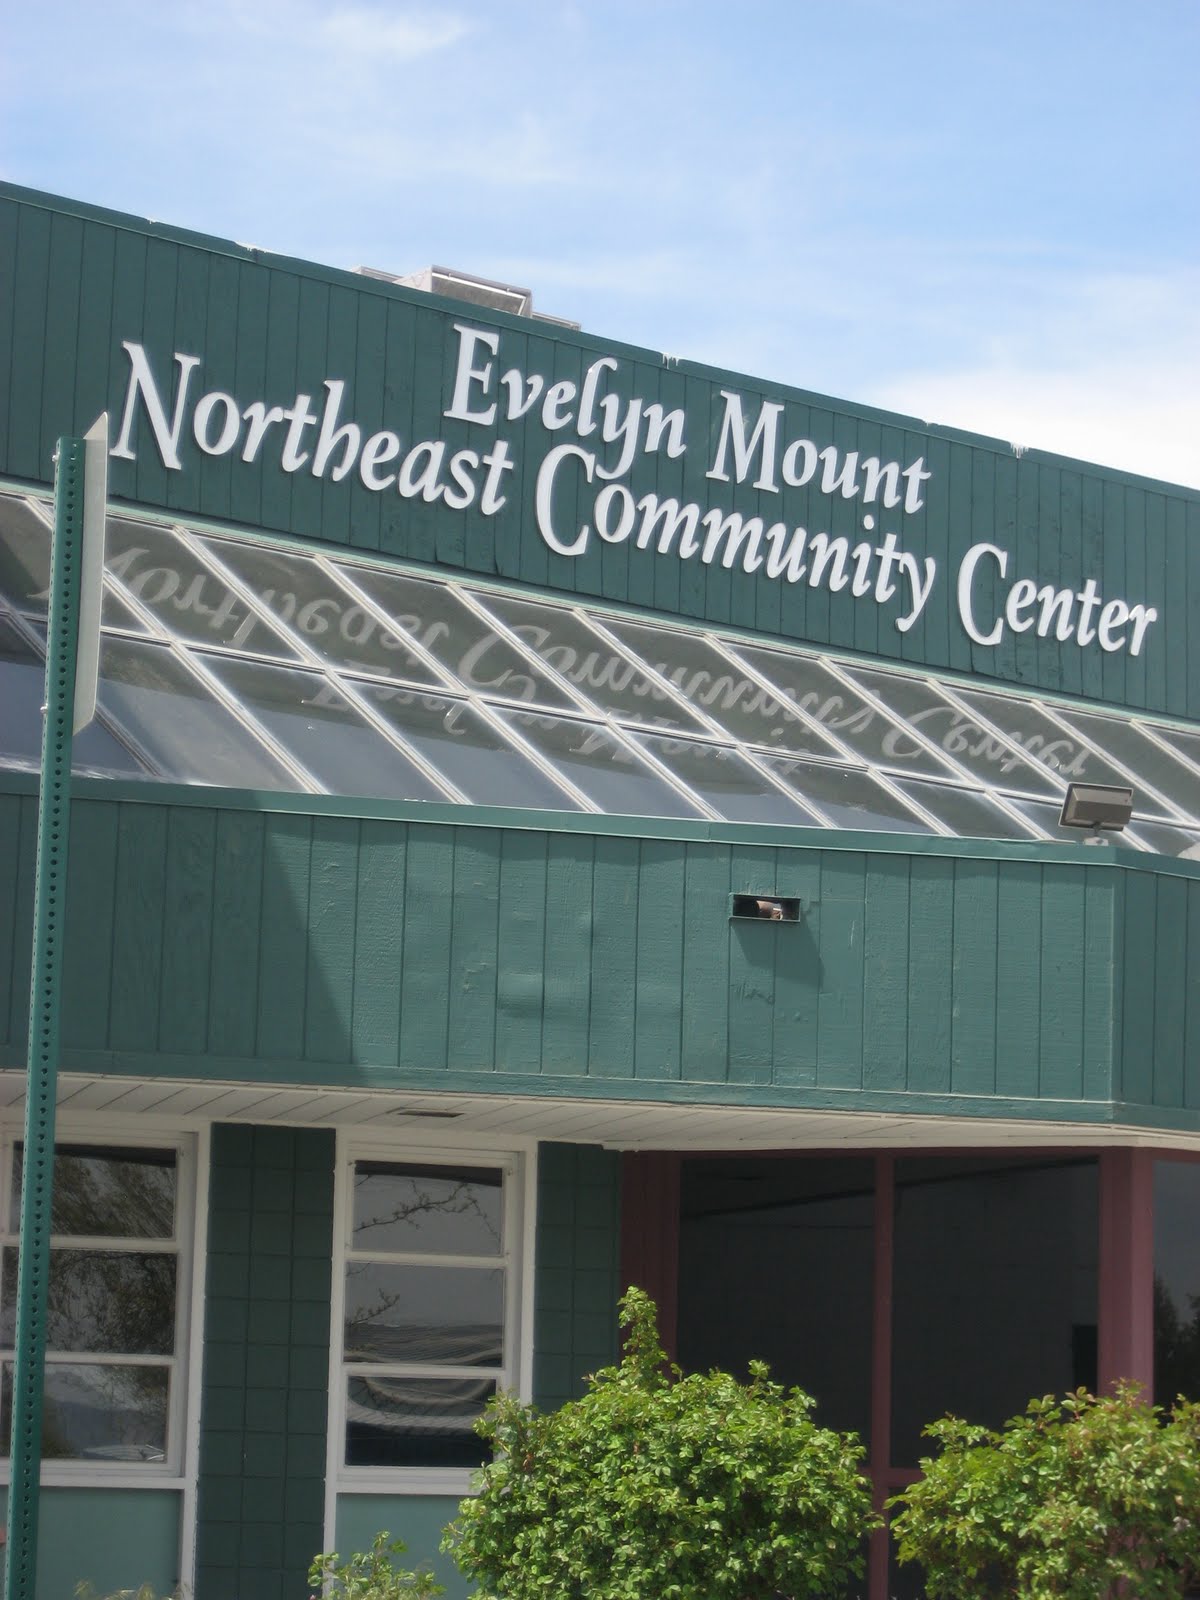 And Evelyn Mount Northeast Community Center stuck a few up as well.